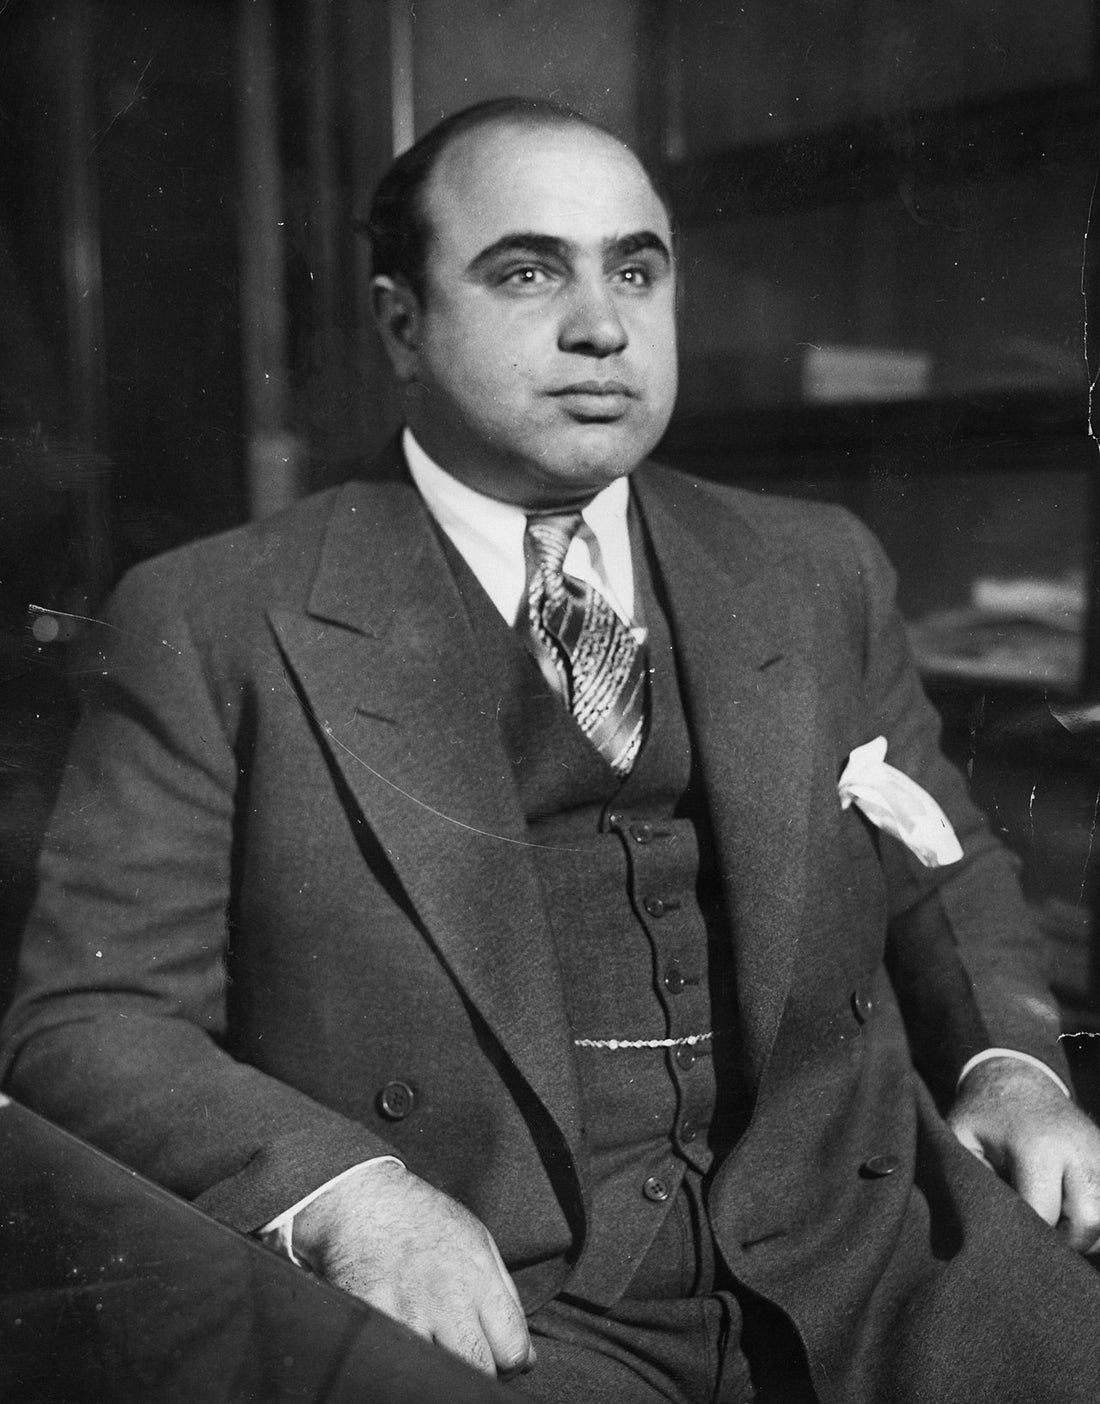 History of Alphonse Capone, founder of The Chicago Outfit